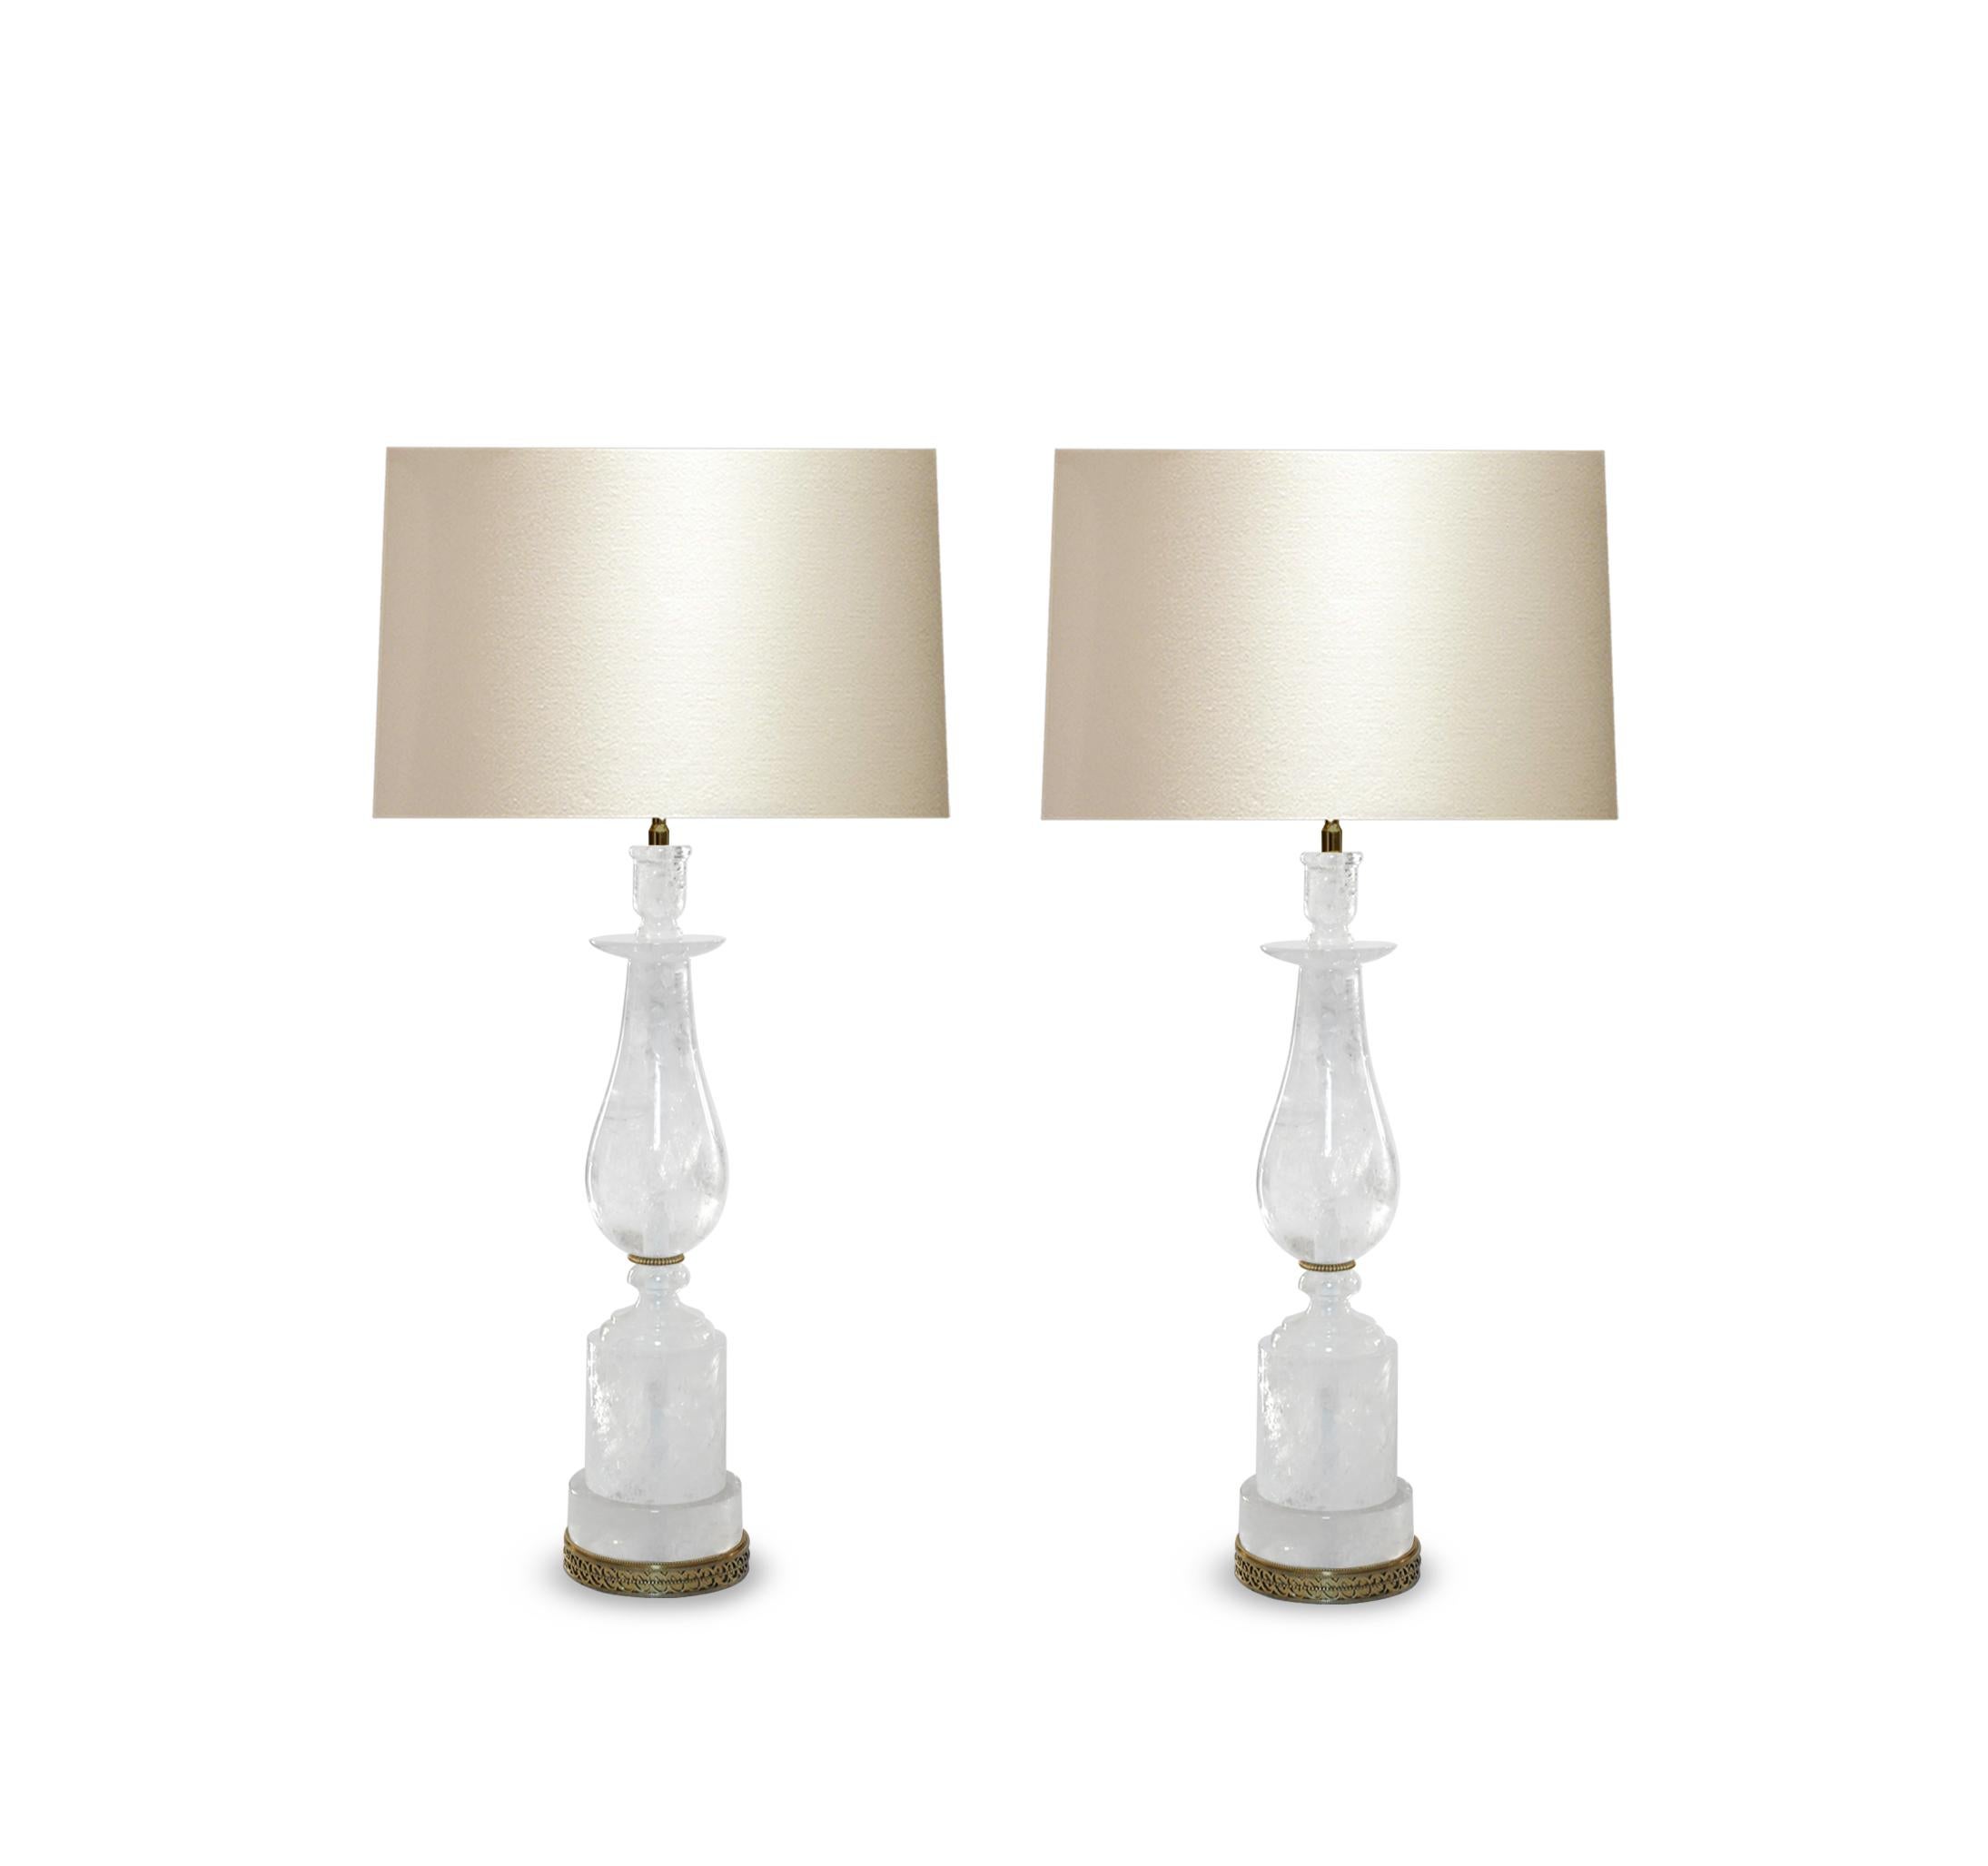 Pair of classic style rock crystal lamps with brass bases and decoration. Created by Phoenix Gallery, NYC.
Measures: To the rock crystal 22in/ H.
(Lampshade not included).